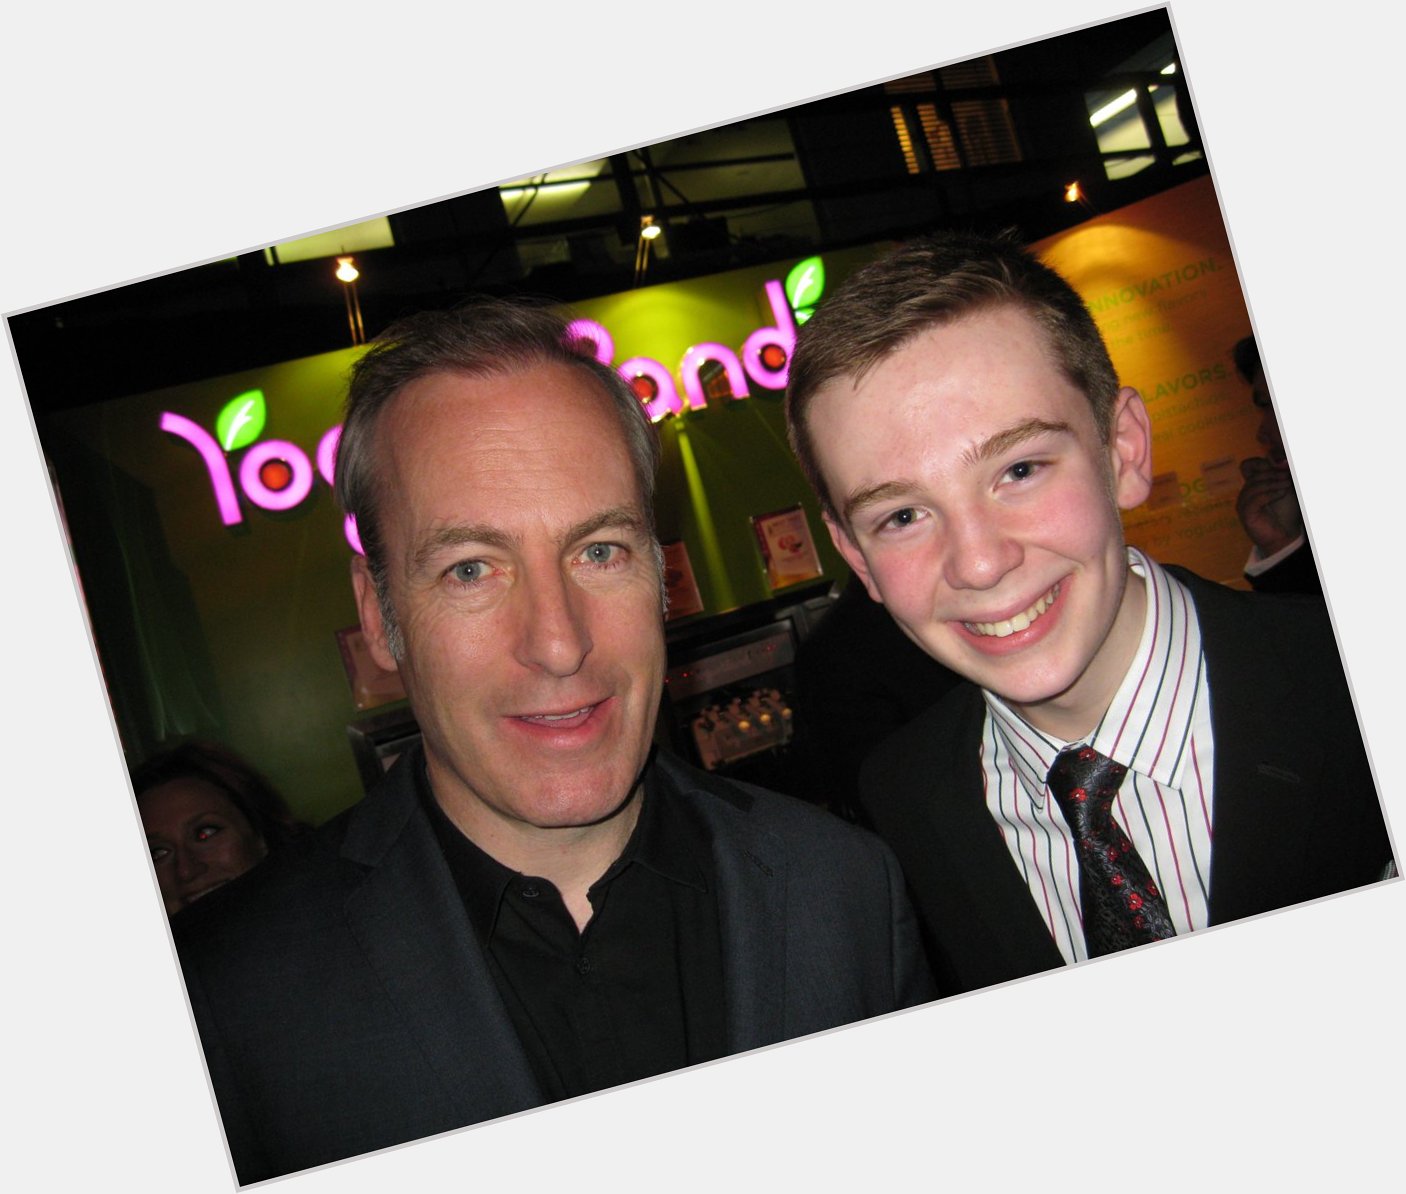 Happy Birthday to my man Bob Odenkirk. Hope the day is breaking good for you! 